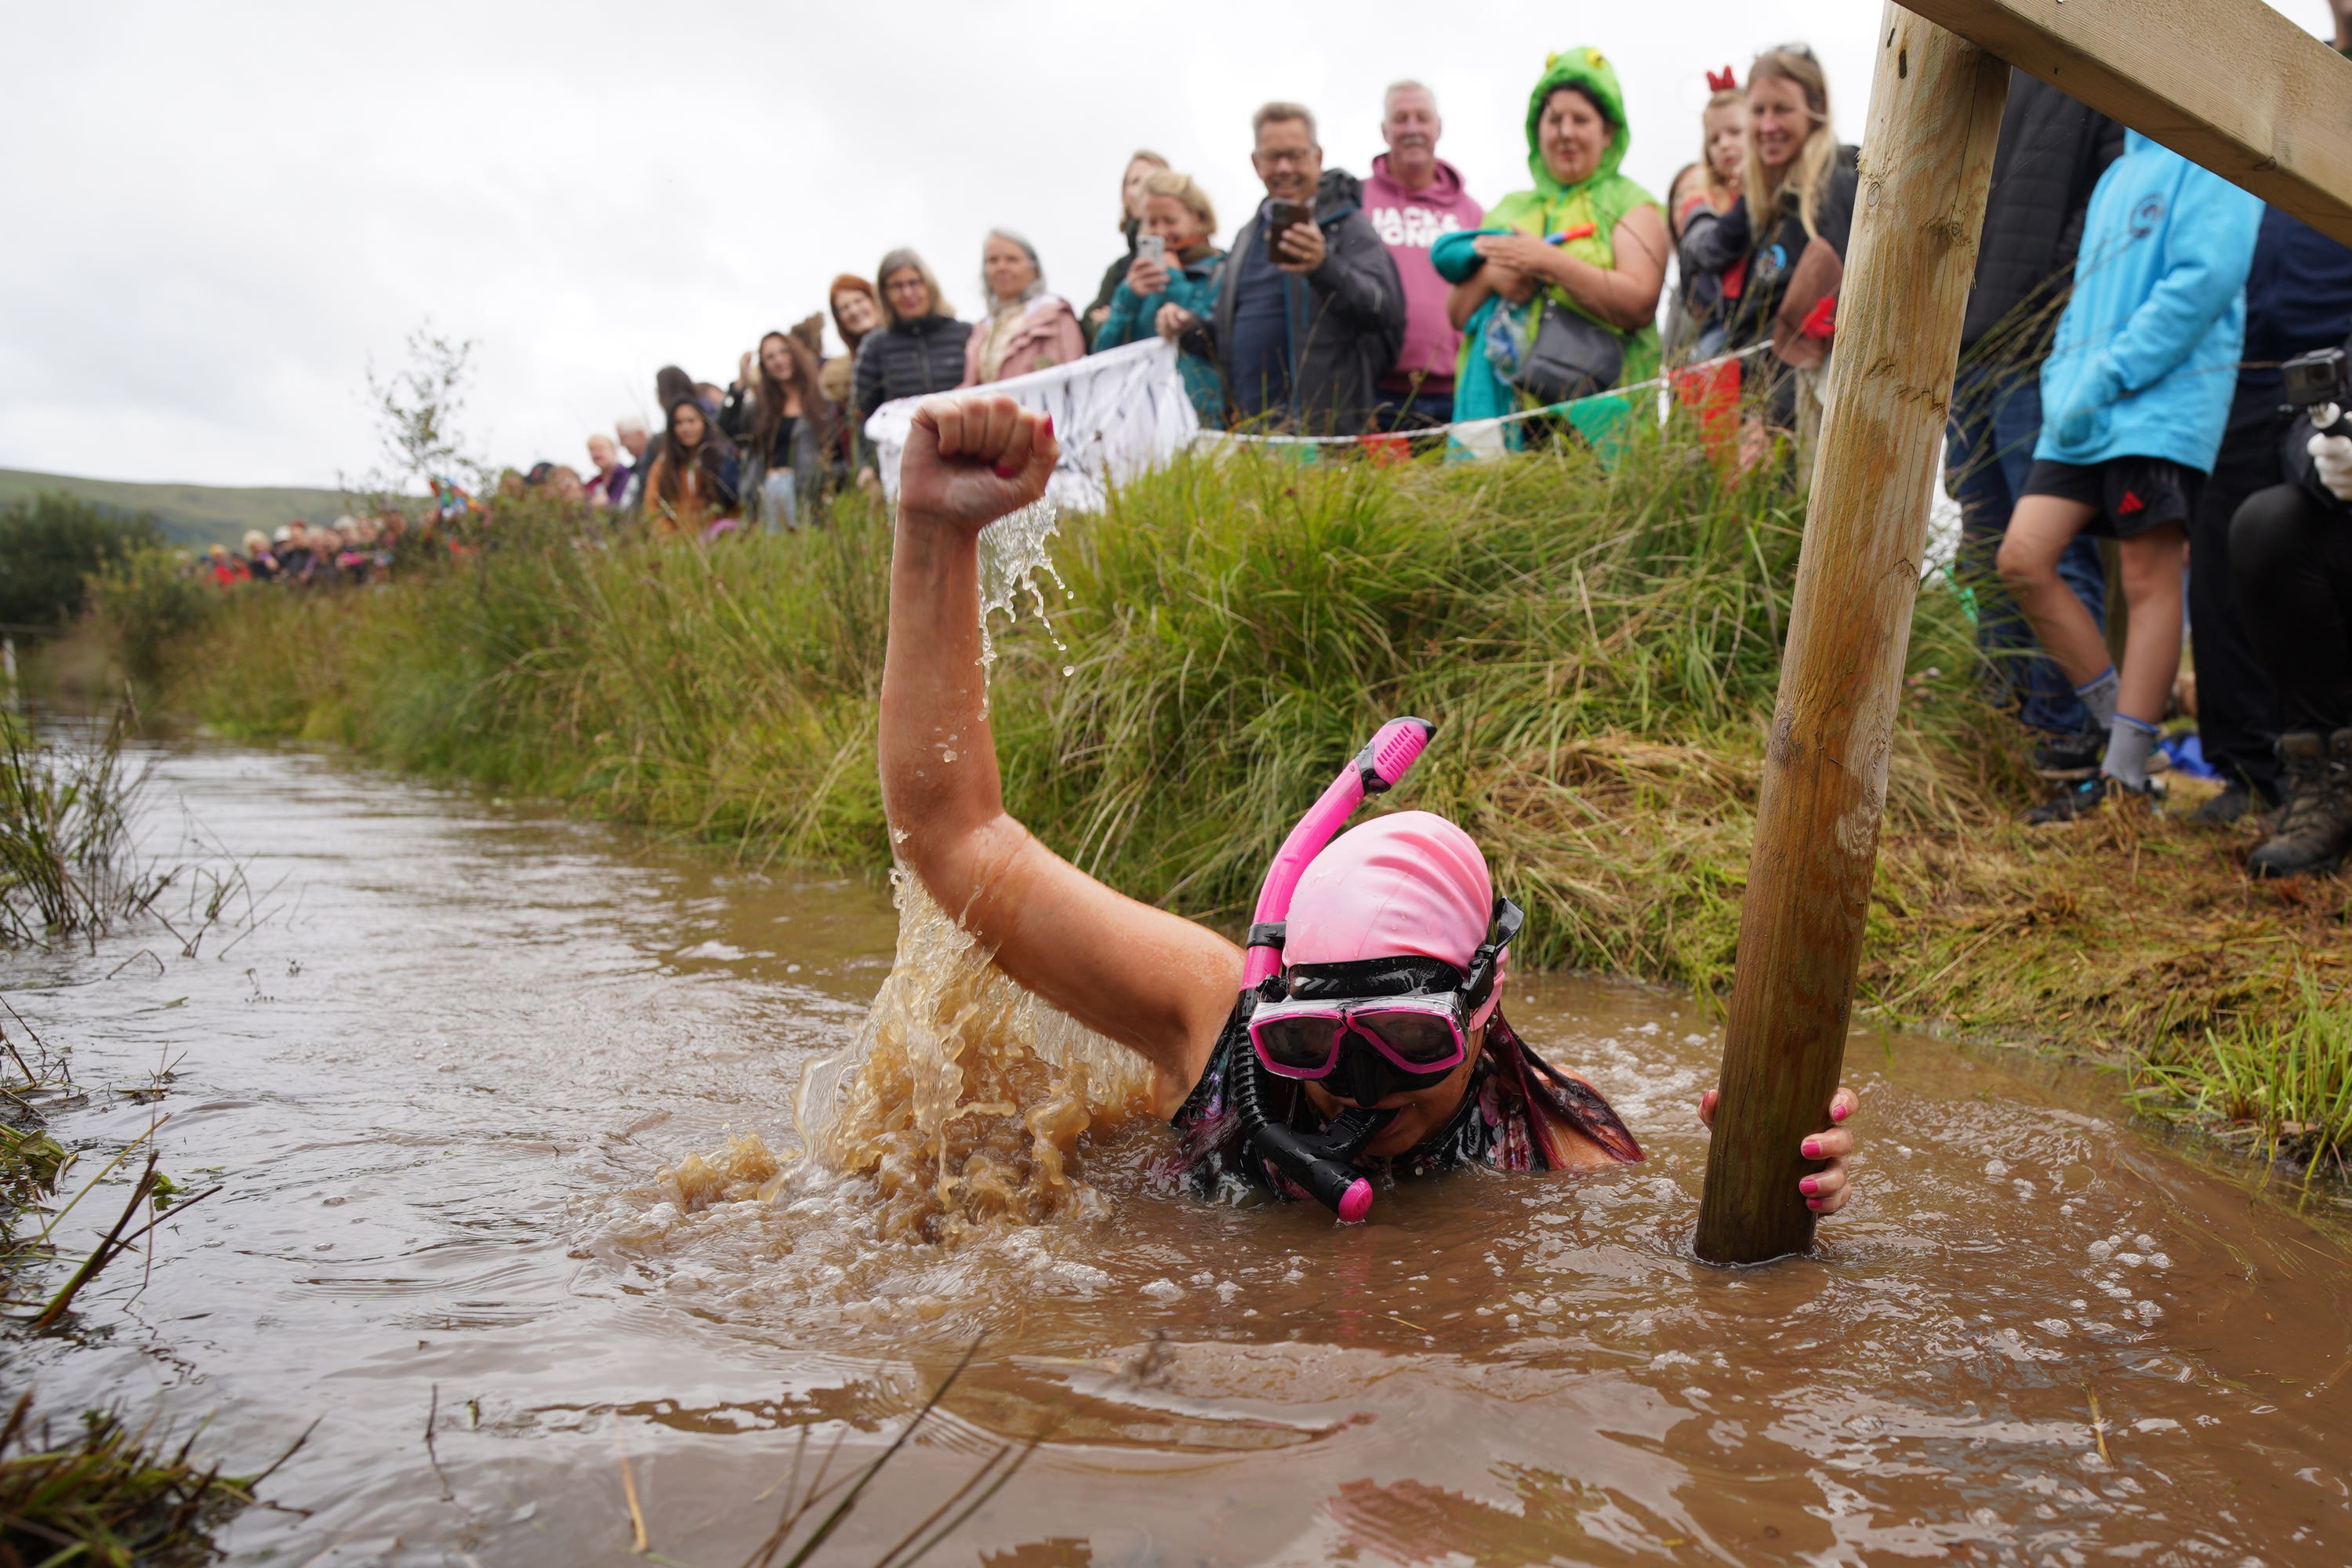 In Pictures Making a splash at the World Bog Snorkelling Championships